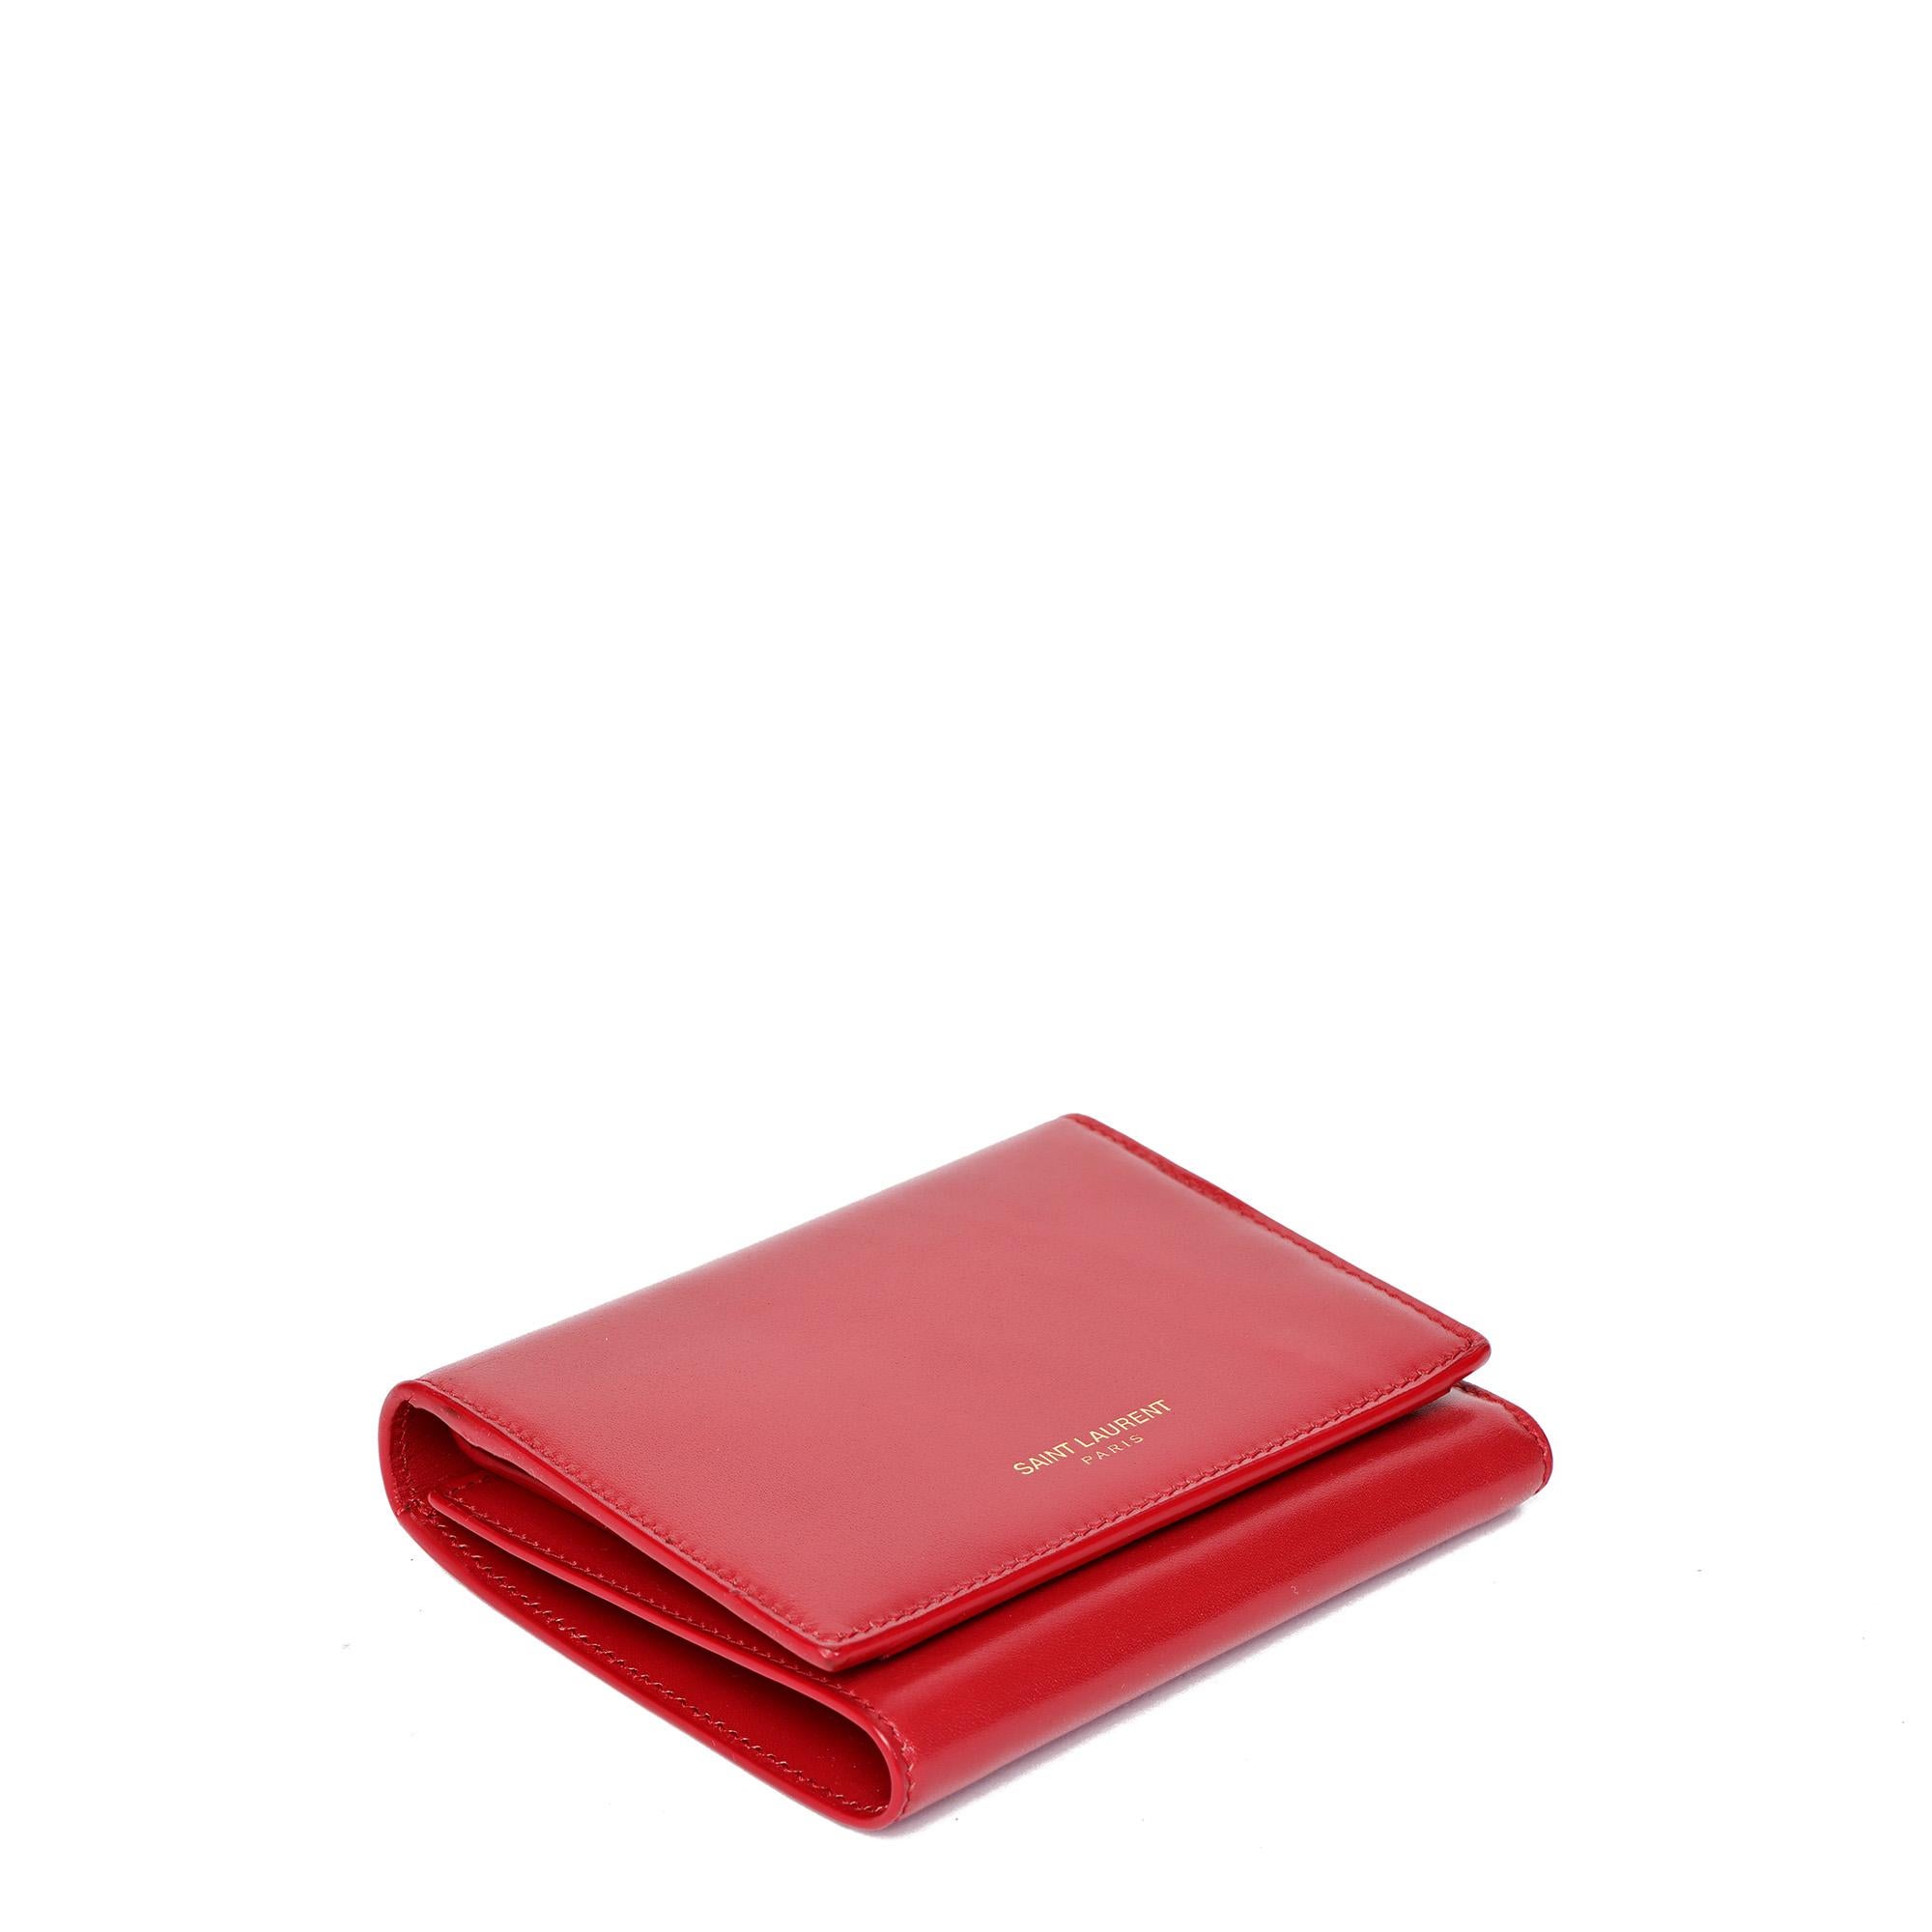 Saint Laurent Rouge Orient Shiny Smooth Leather Bi-fold Compact Wallet

CONDITION NOTES
The exterior is excellent condition with light signs of use.
The interior is in excellent condition with light signs of use.
The hardware is in excellent